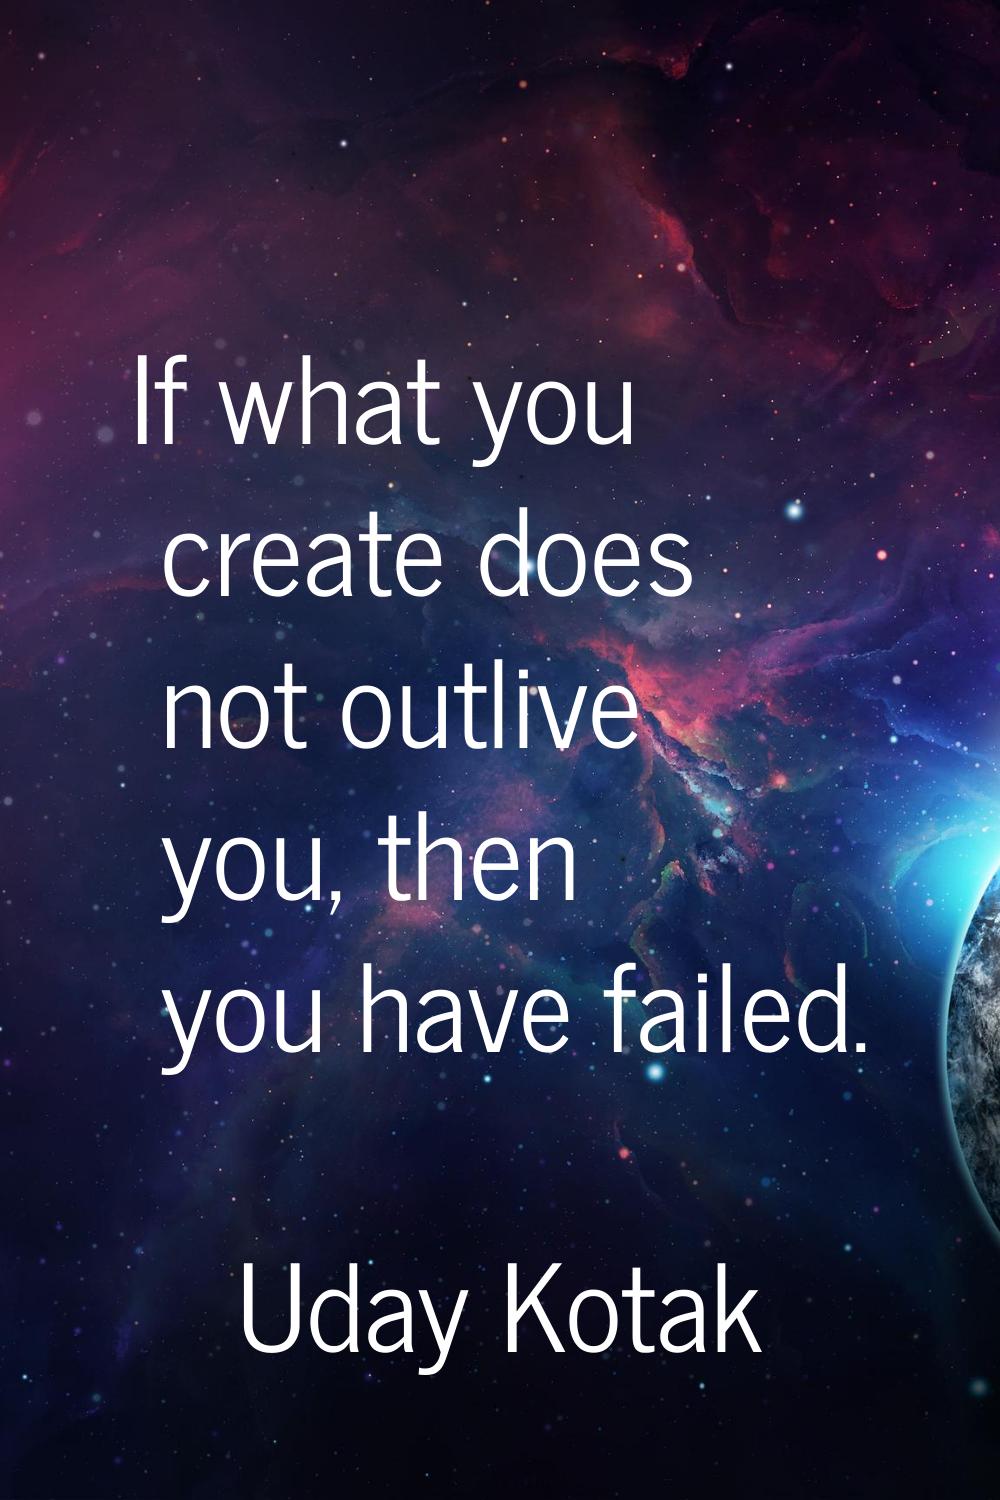 If what you create does not outlive you, then you have failed.